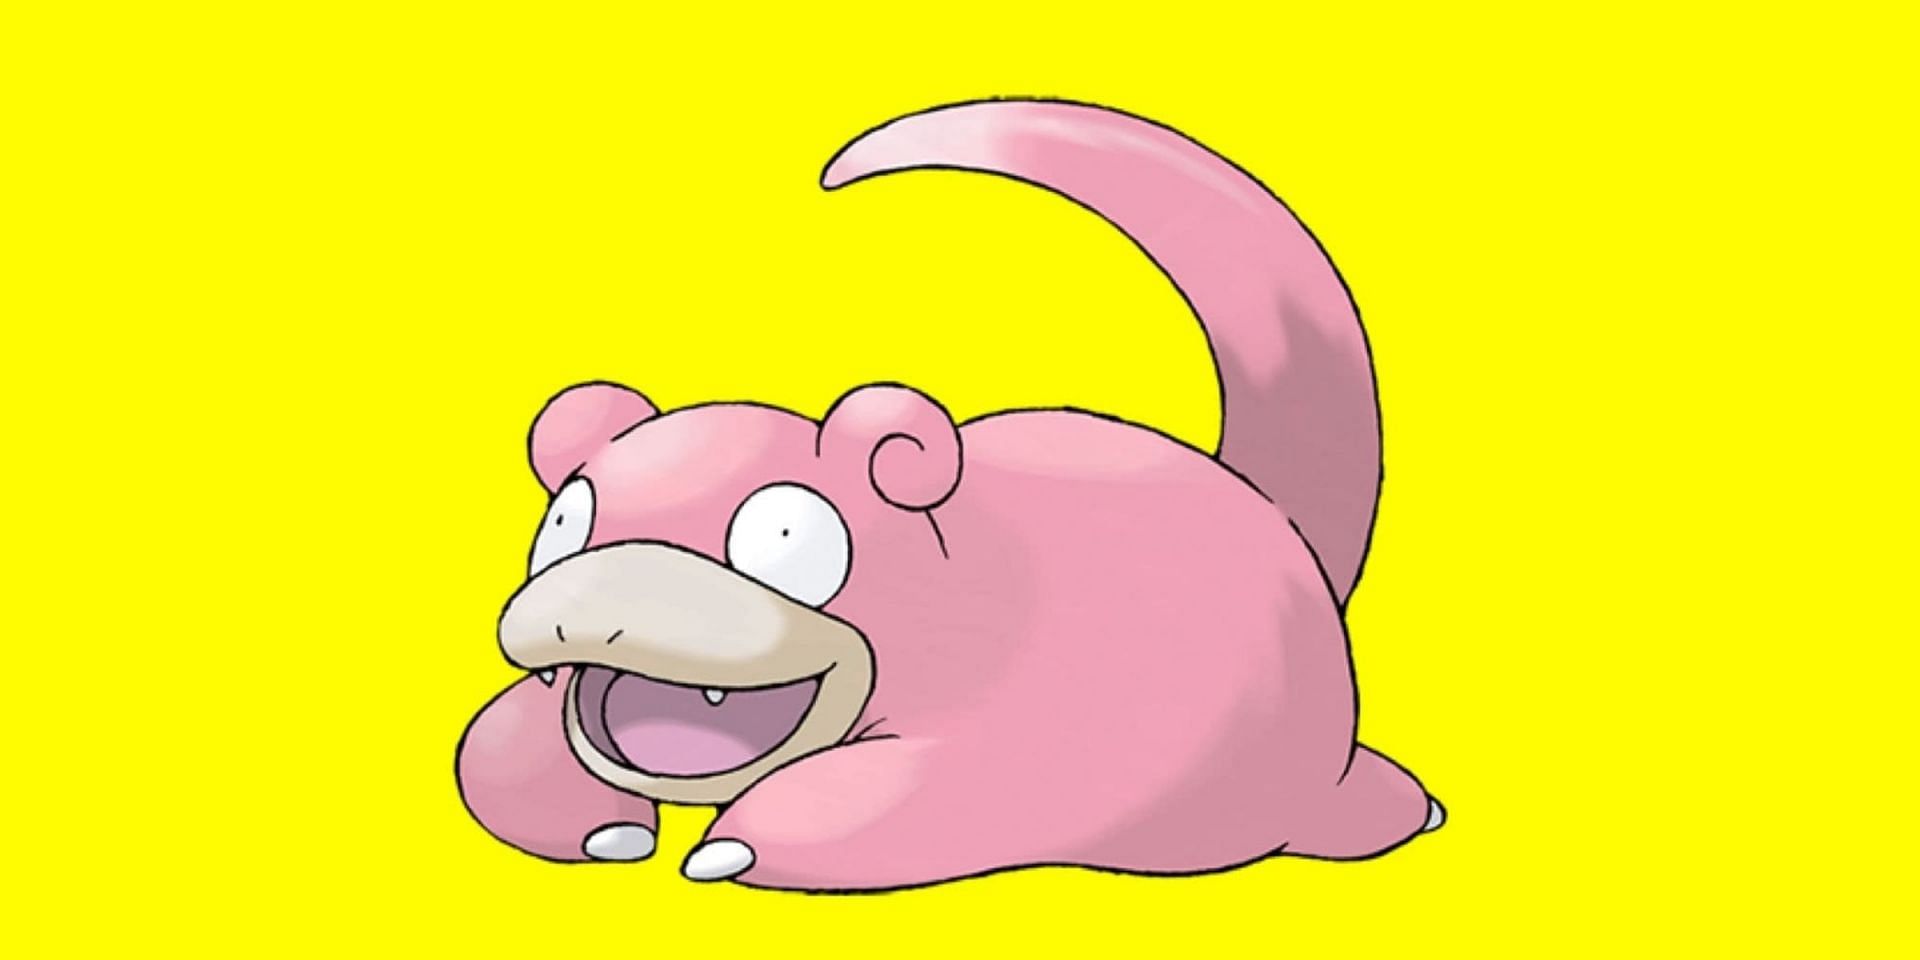 Slowpoke as well as its Galar region counterpart have differing ways to evolve in Pokemon GO (Image via The Pokemon Company)